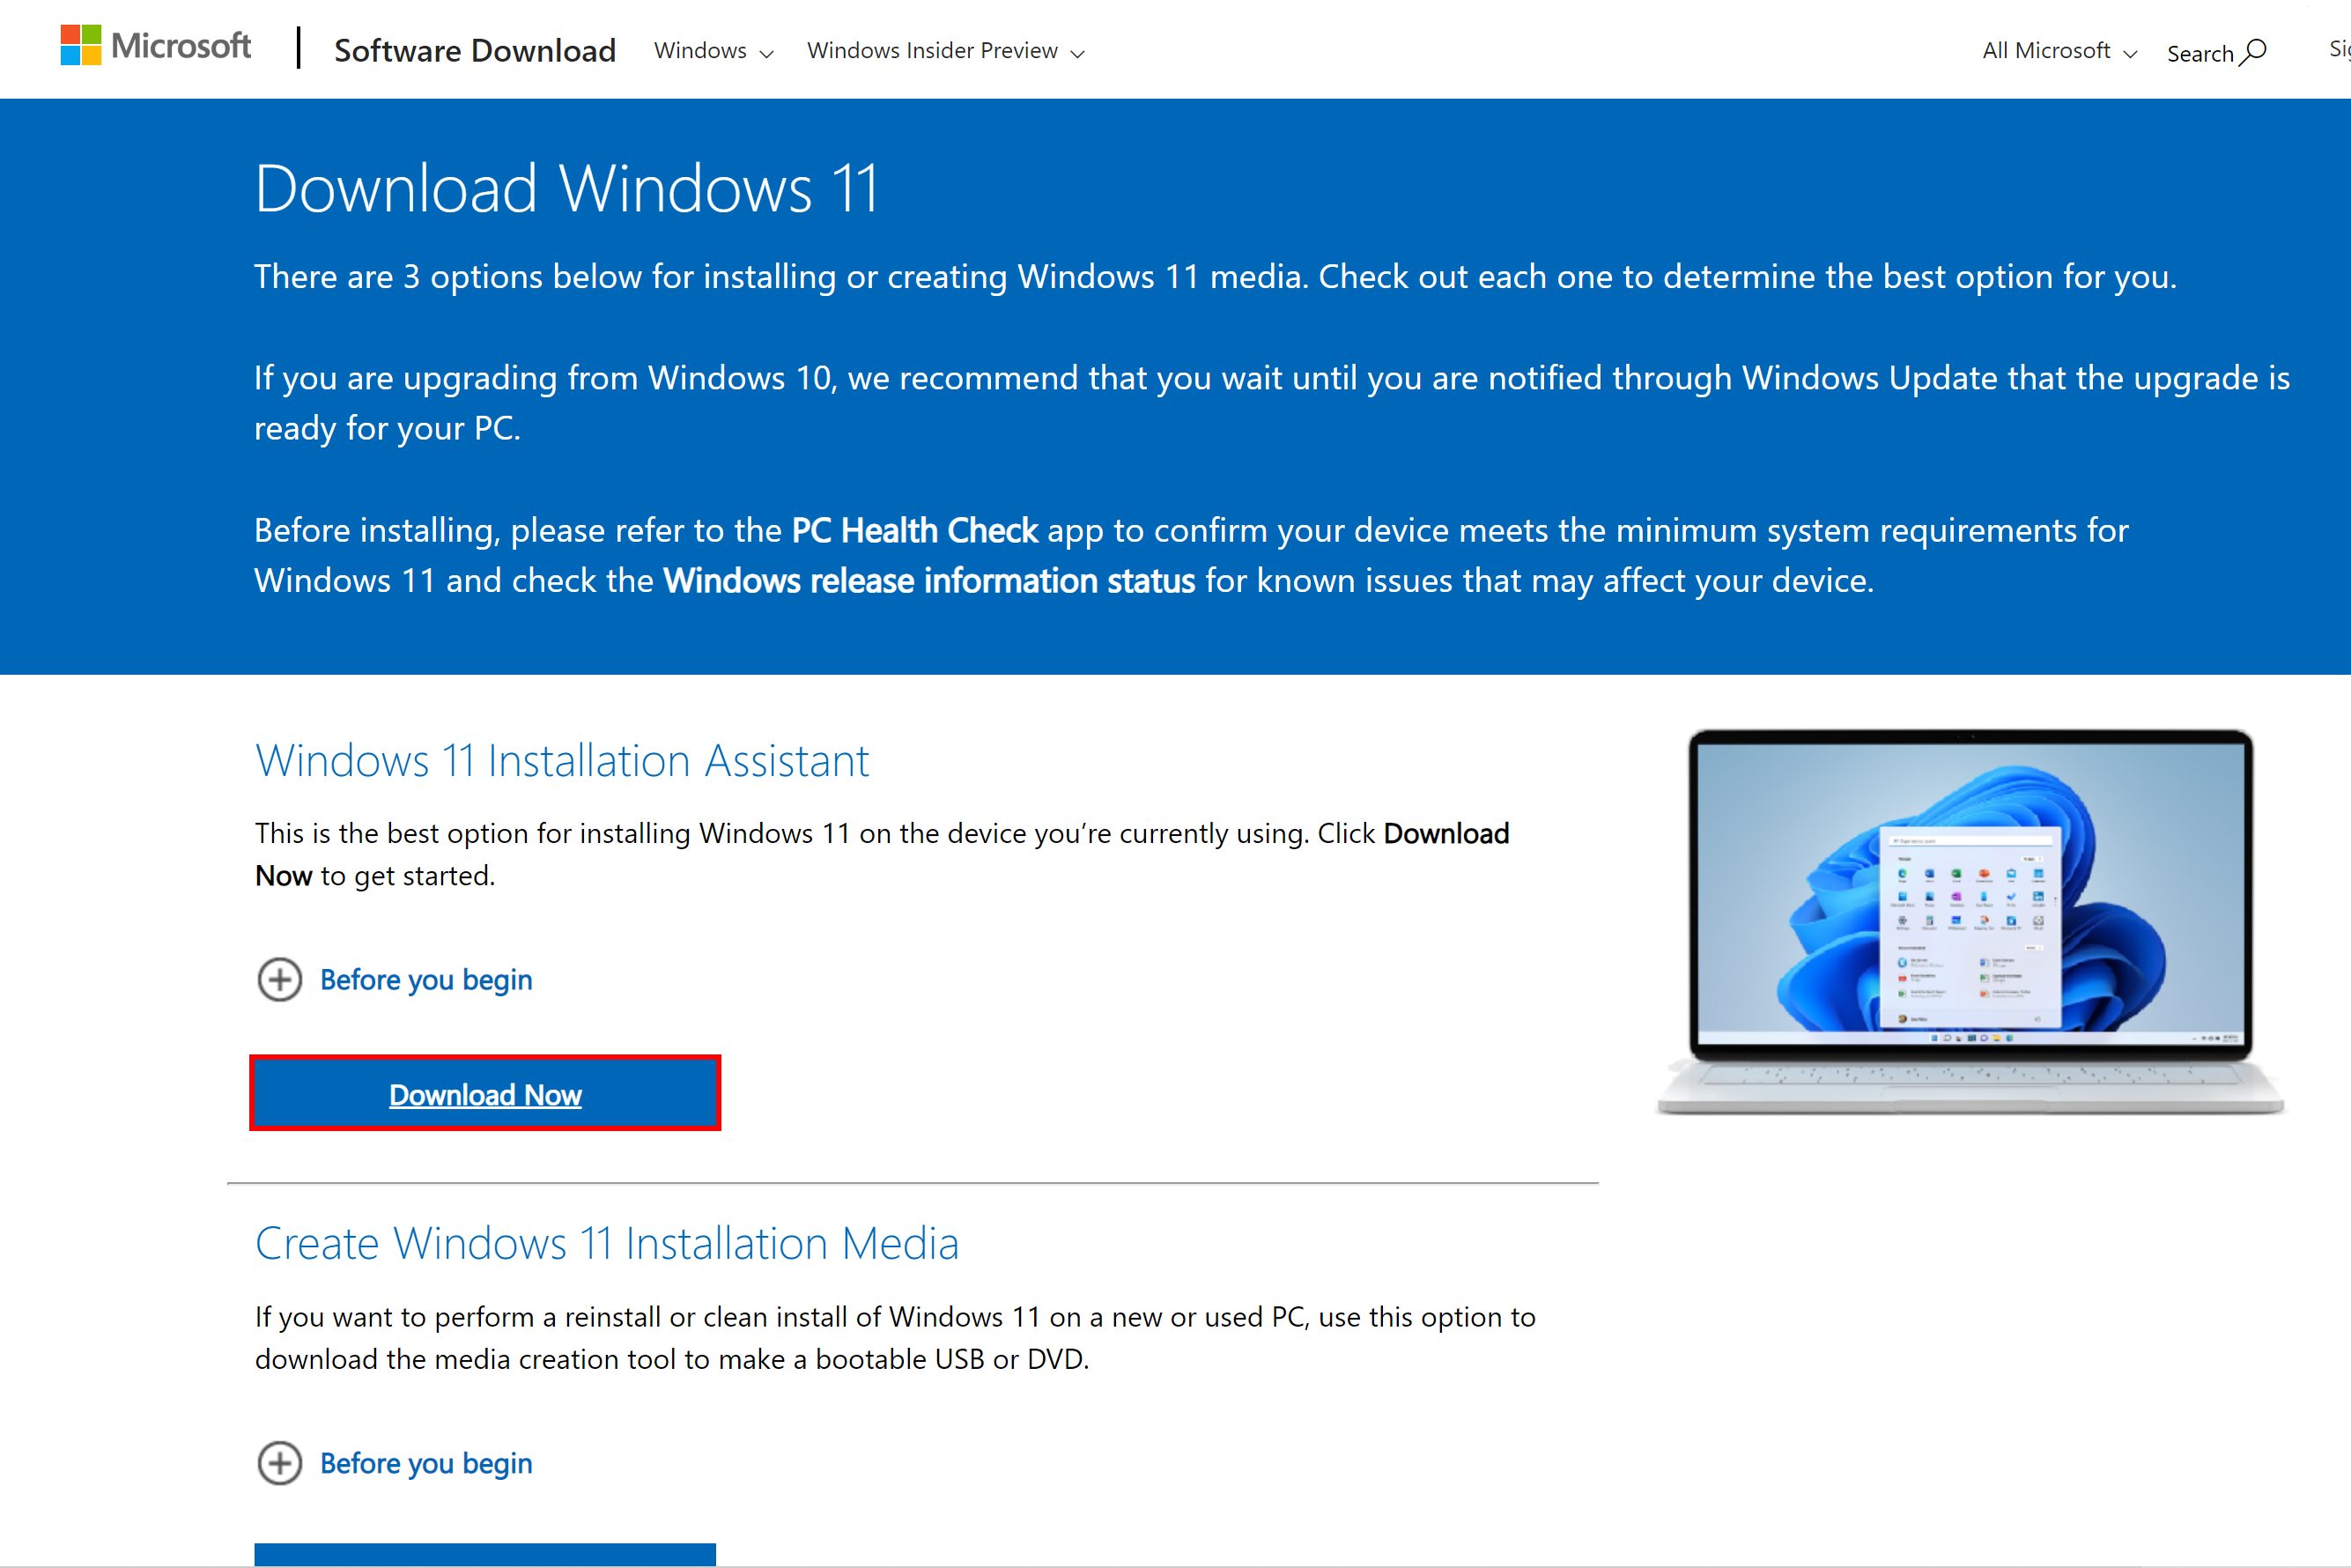 The download now screen for Windows 11 on the Microsoft site